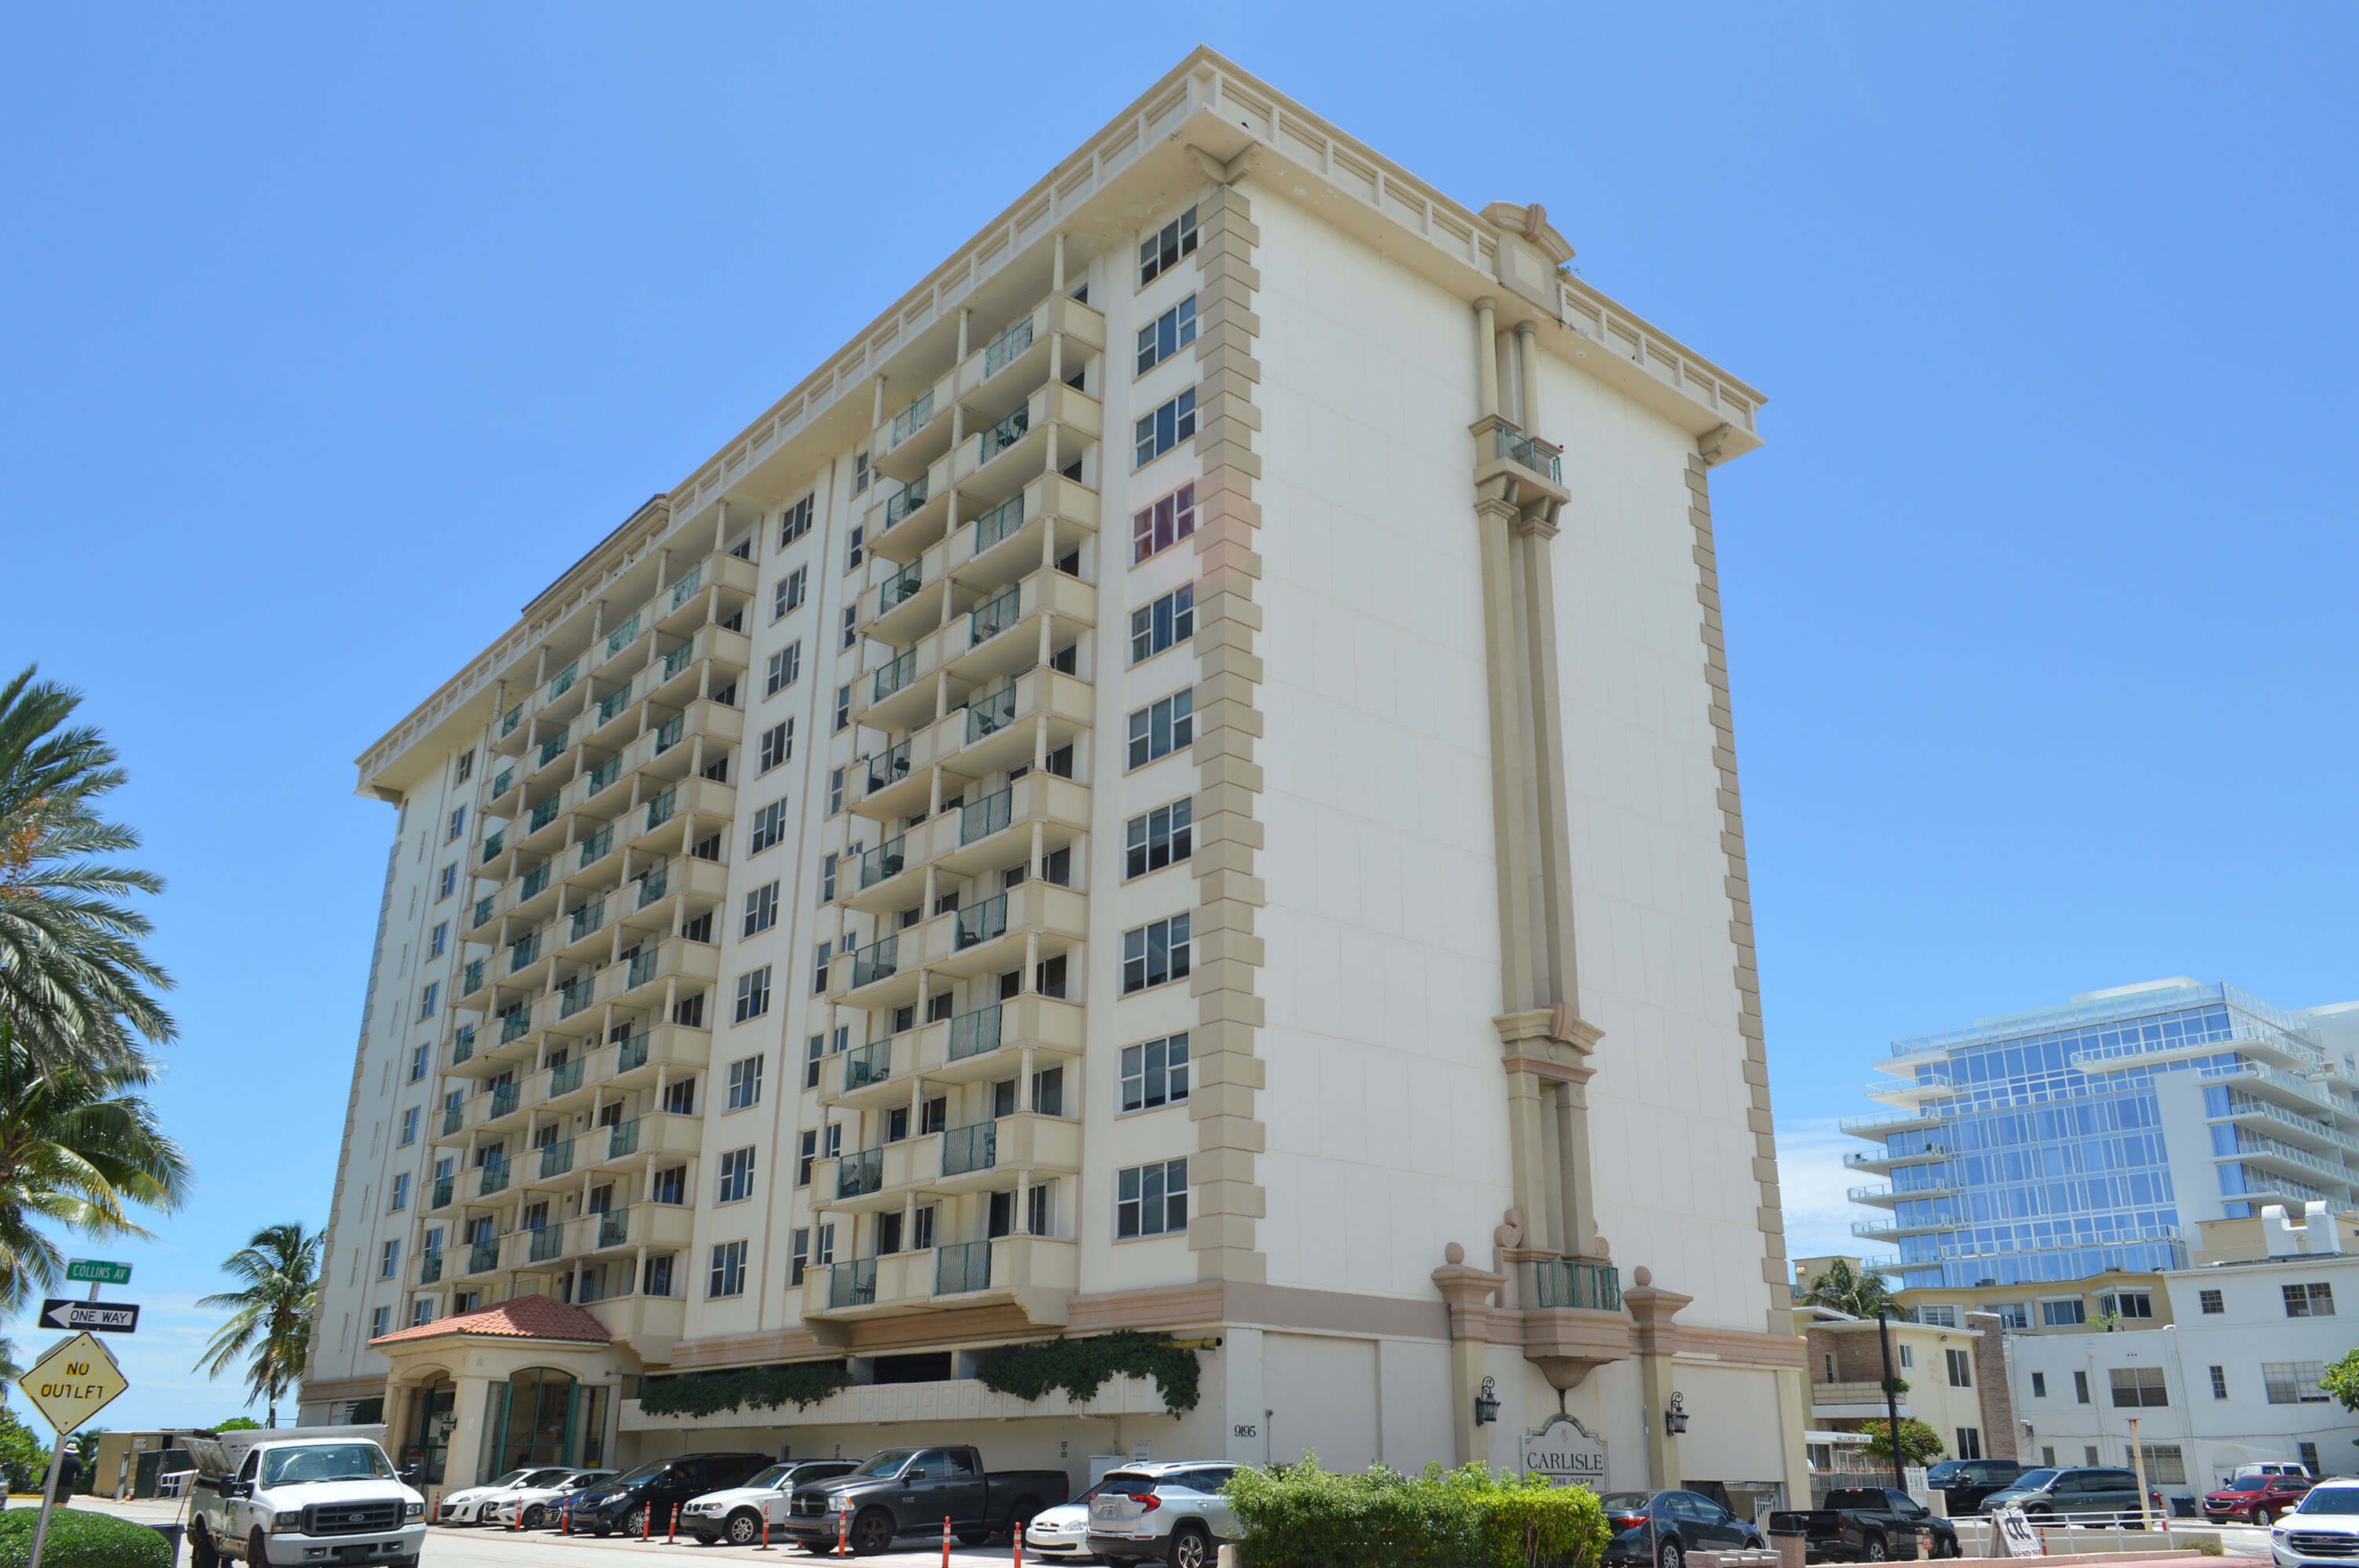 Building Facade - 9195 Collins Ave, Unit 1013, Surfside, FL 33154 - © Flat Fee Florida Realty